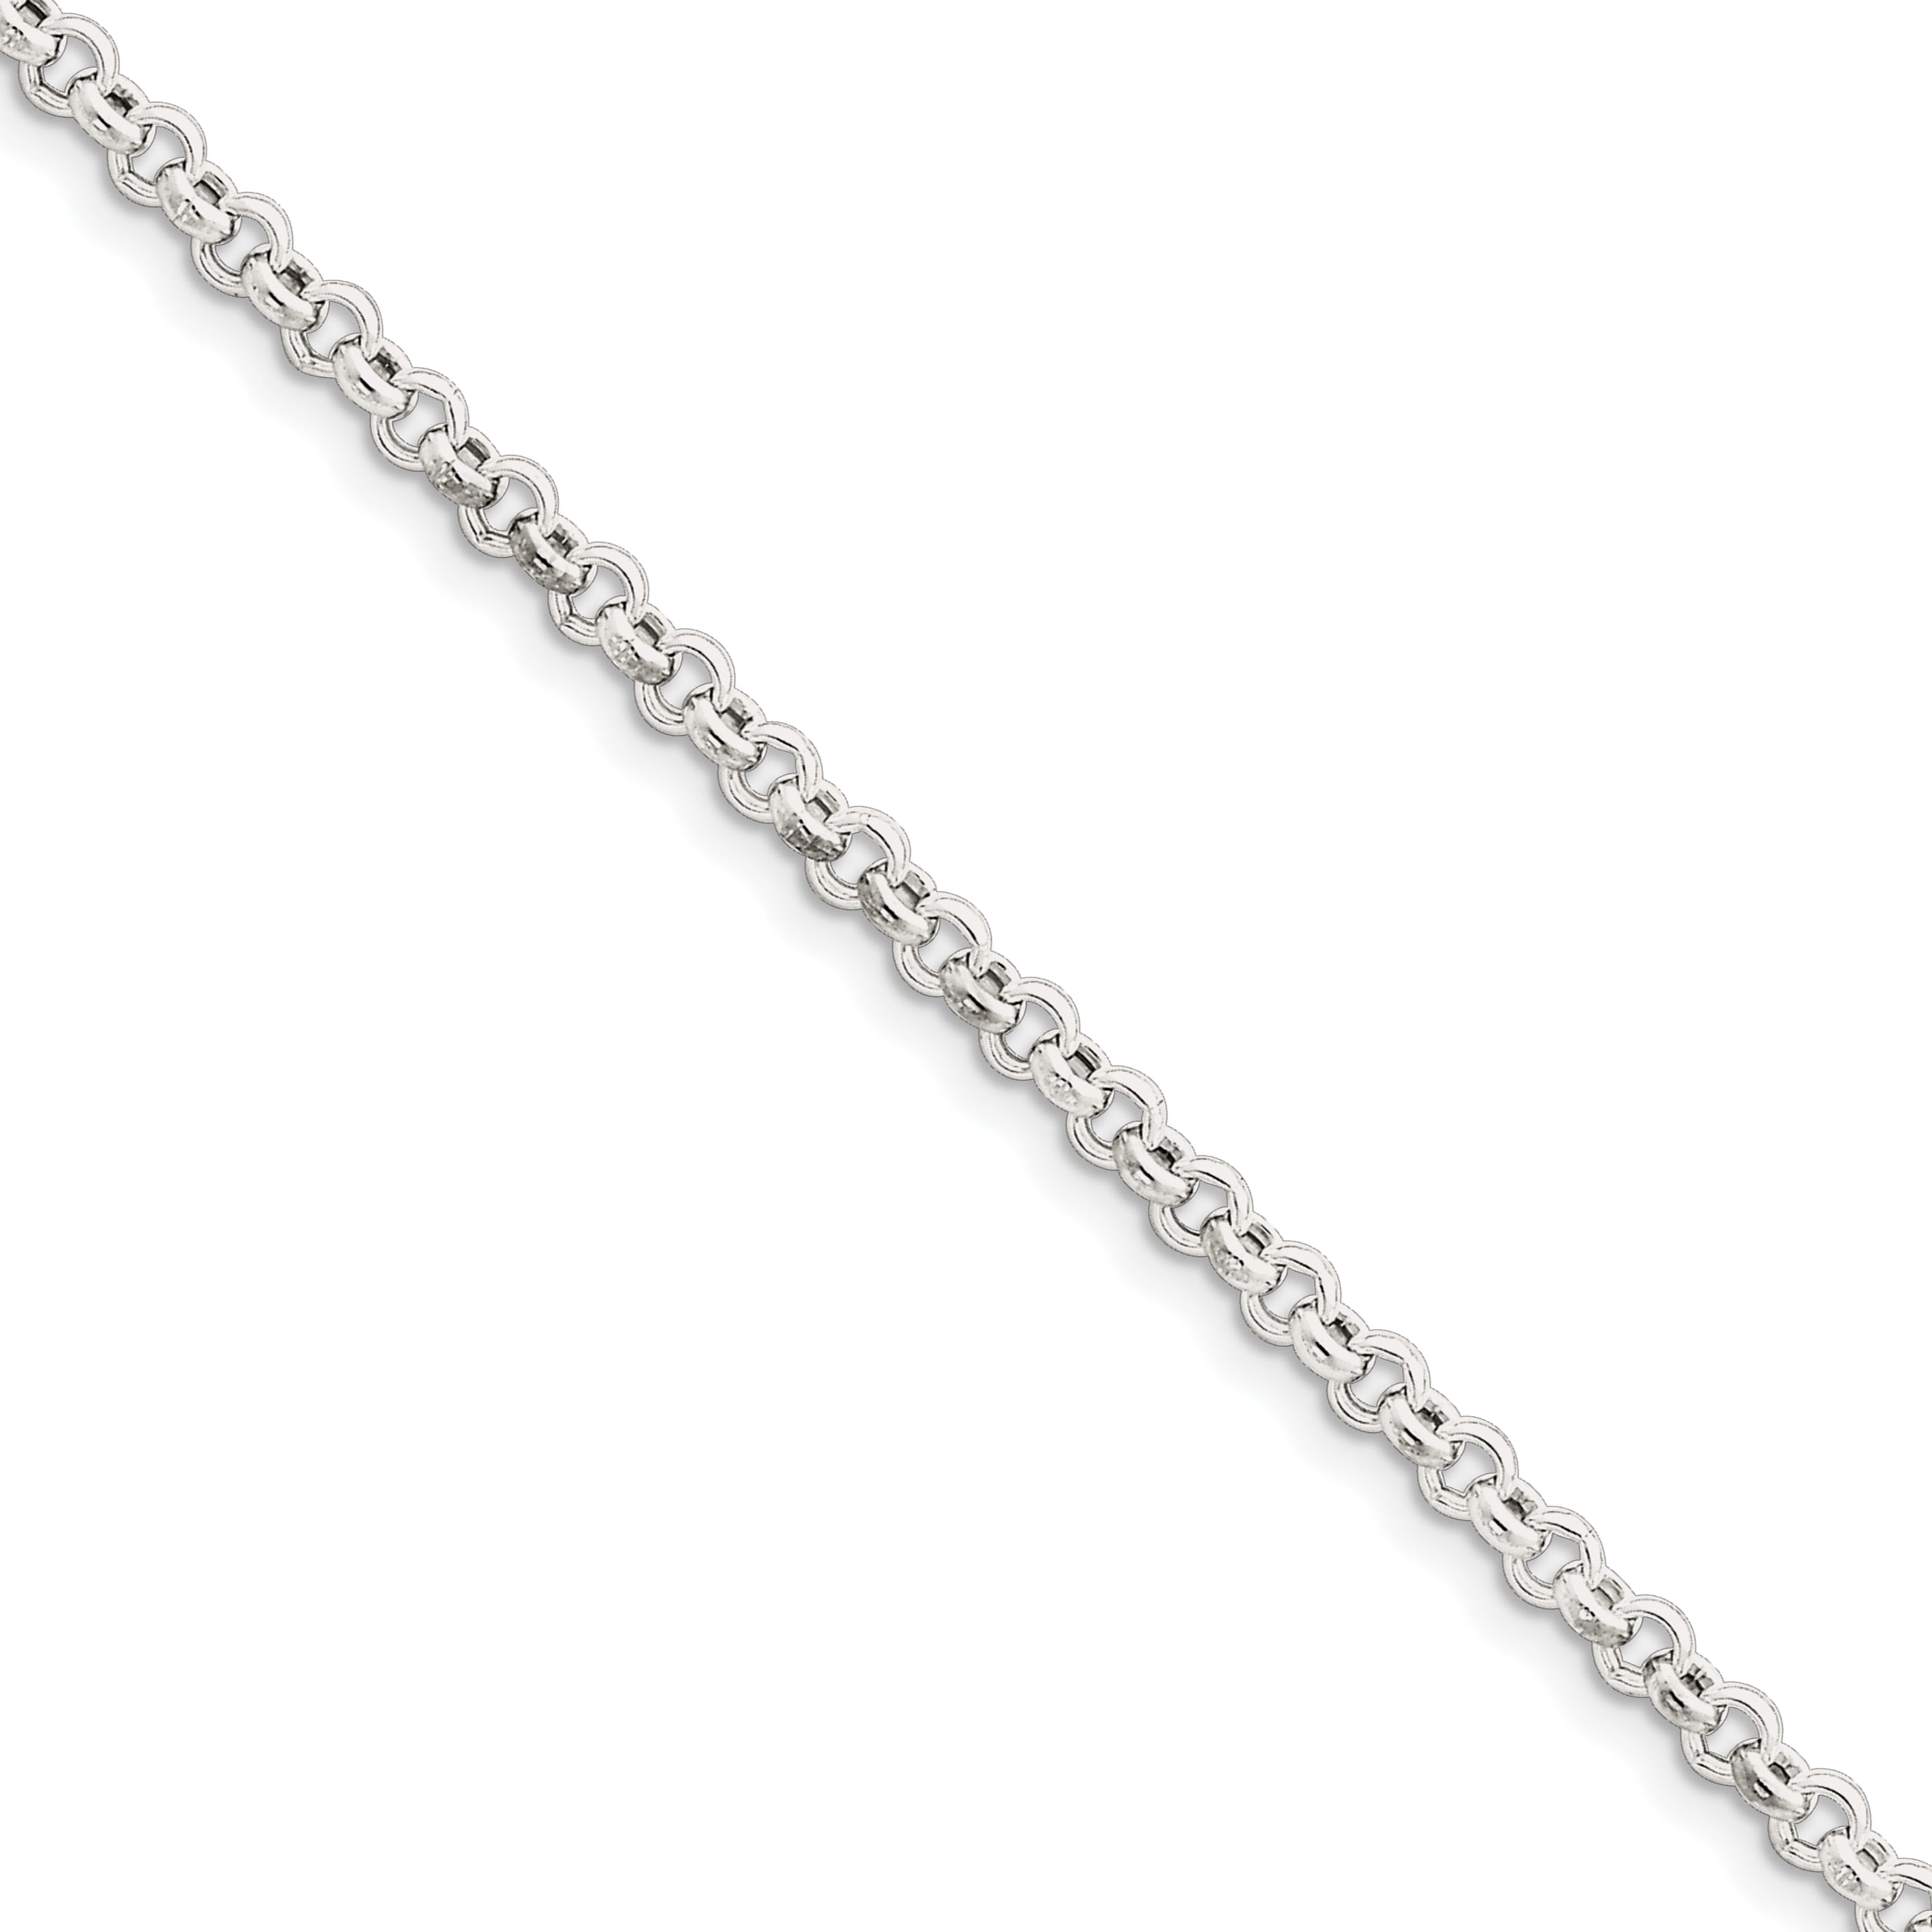 PriceRock Sterling Silver 4.25mm Diamond-cut Rope Chain Necklace 18 Inches